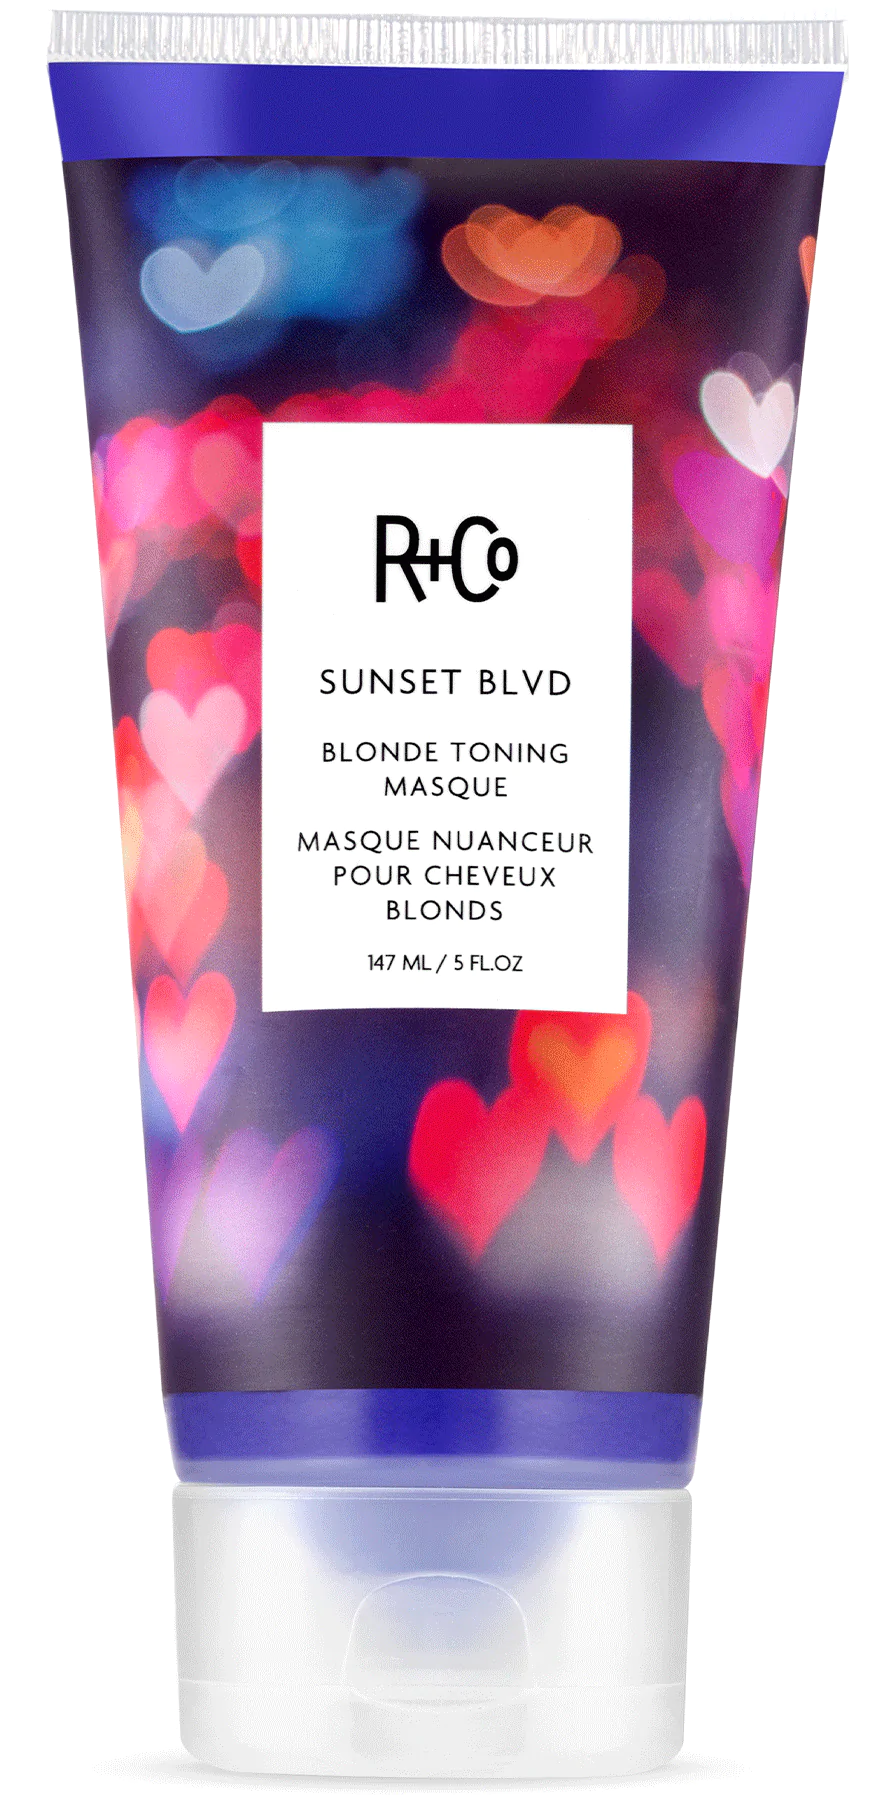 Sunset Blvd.: Toning and Styling Masque